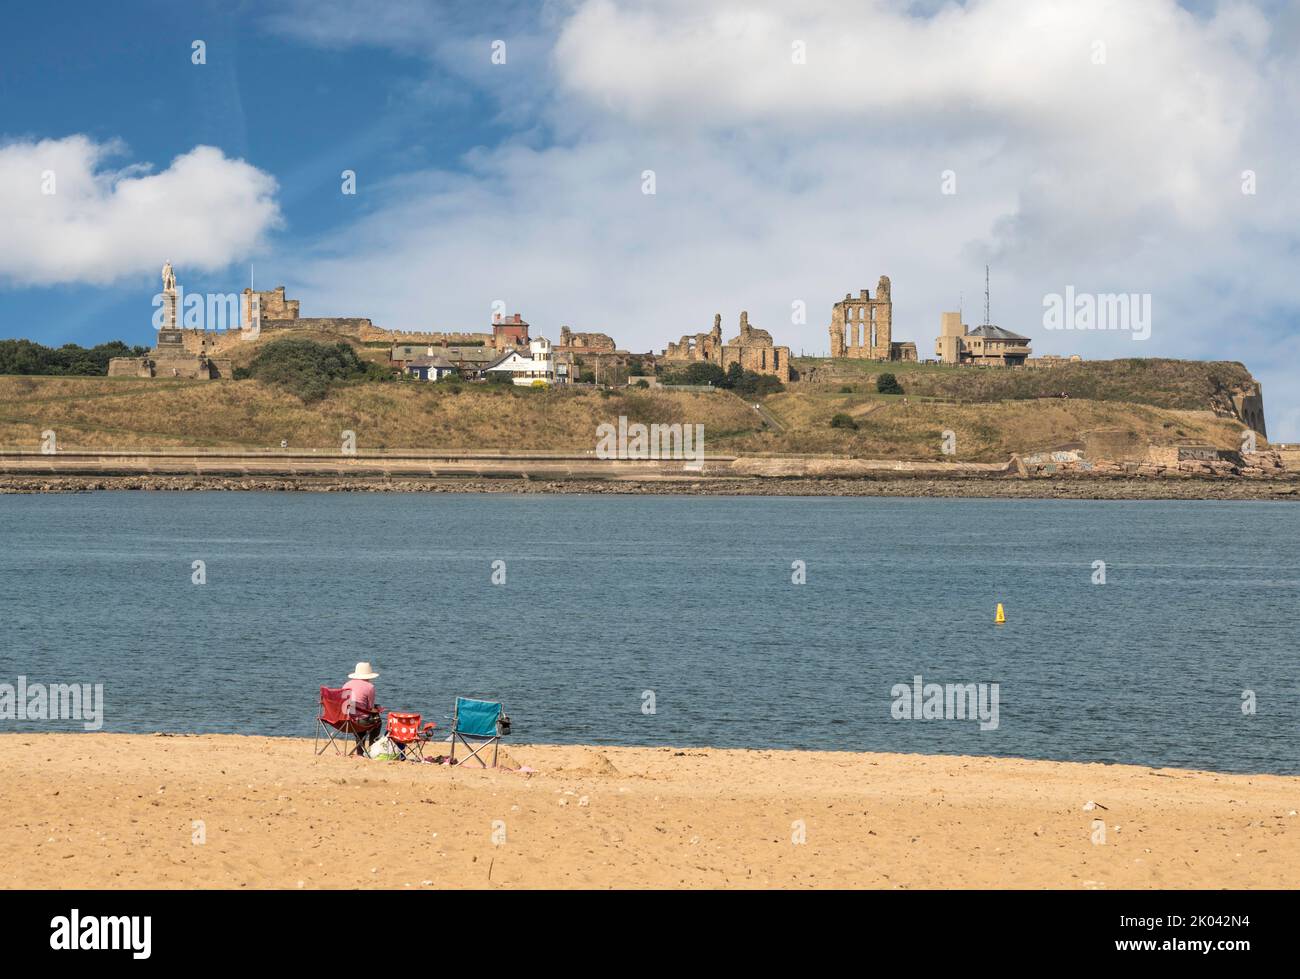 A person sits on Littlehaven Beach, South Shields, looking across the river Tyne to Tynemouth Priory and Castle, England, UK Stock Photo